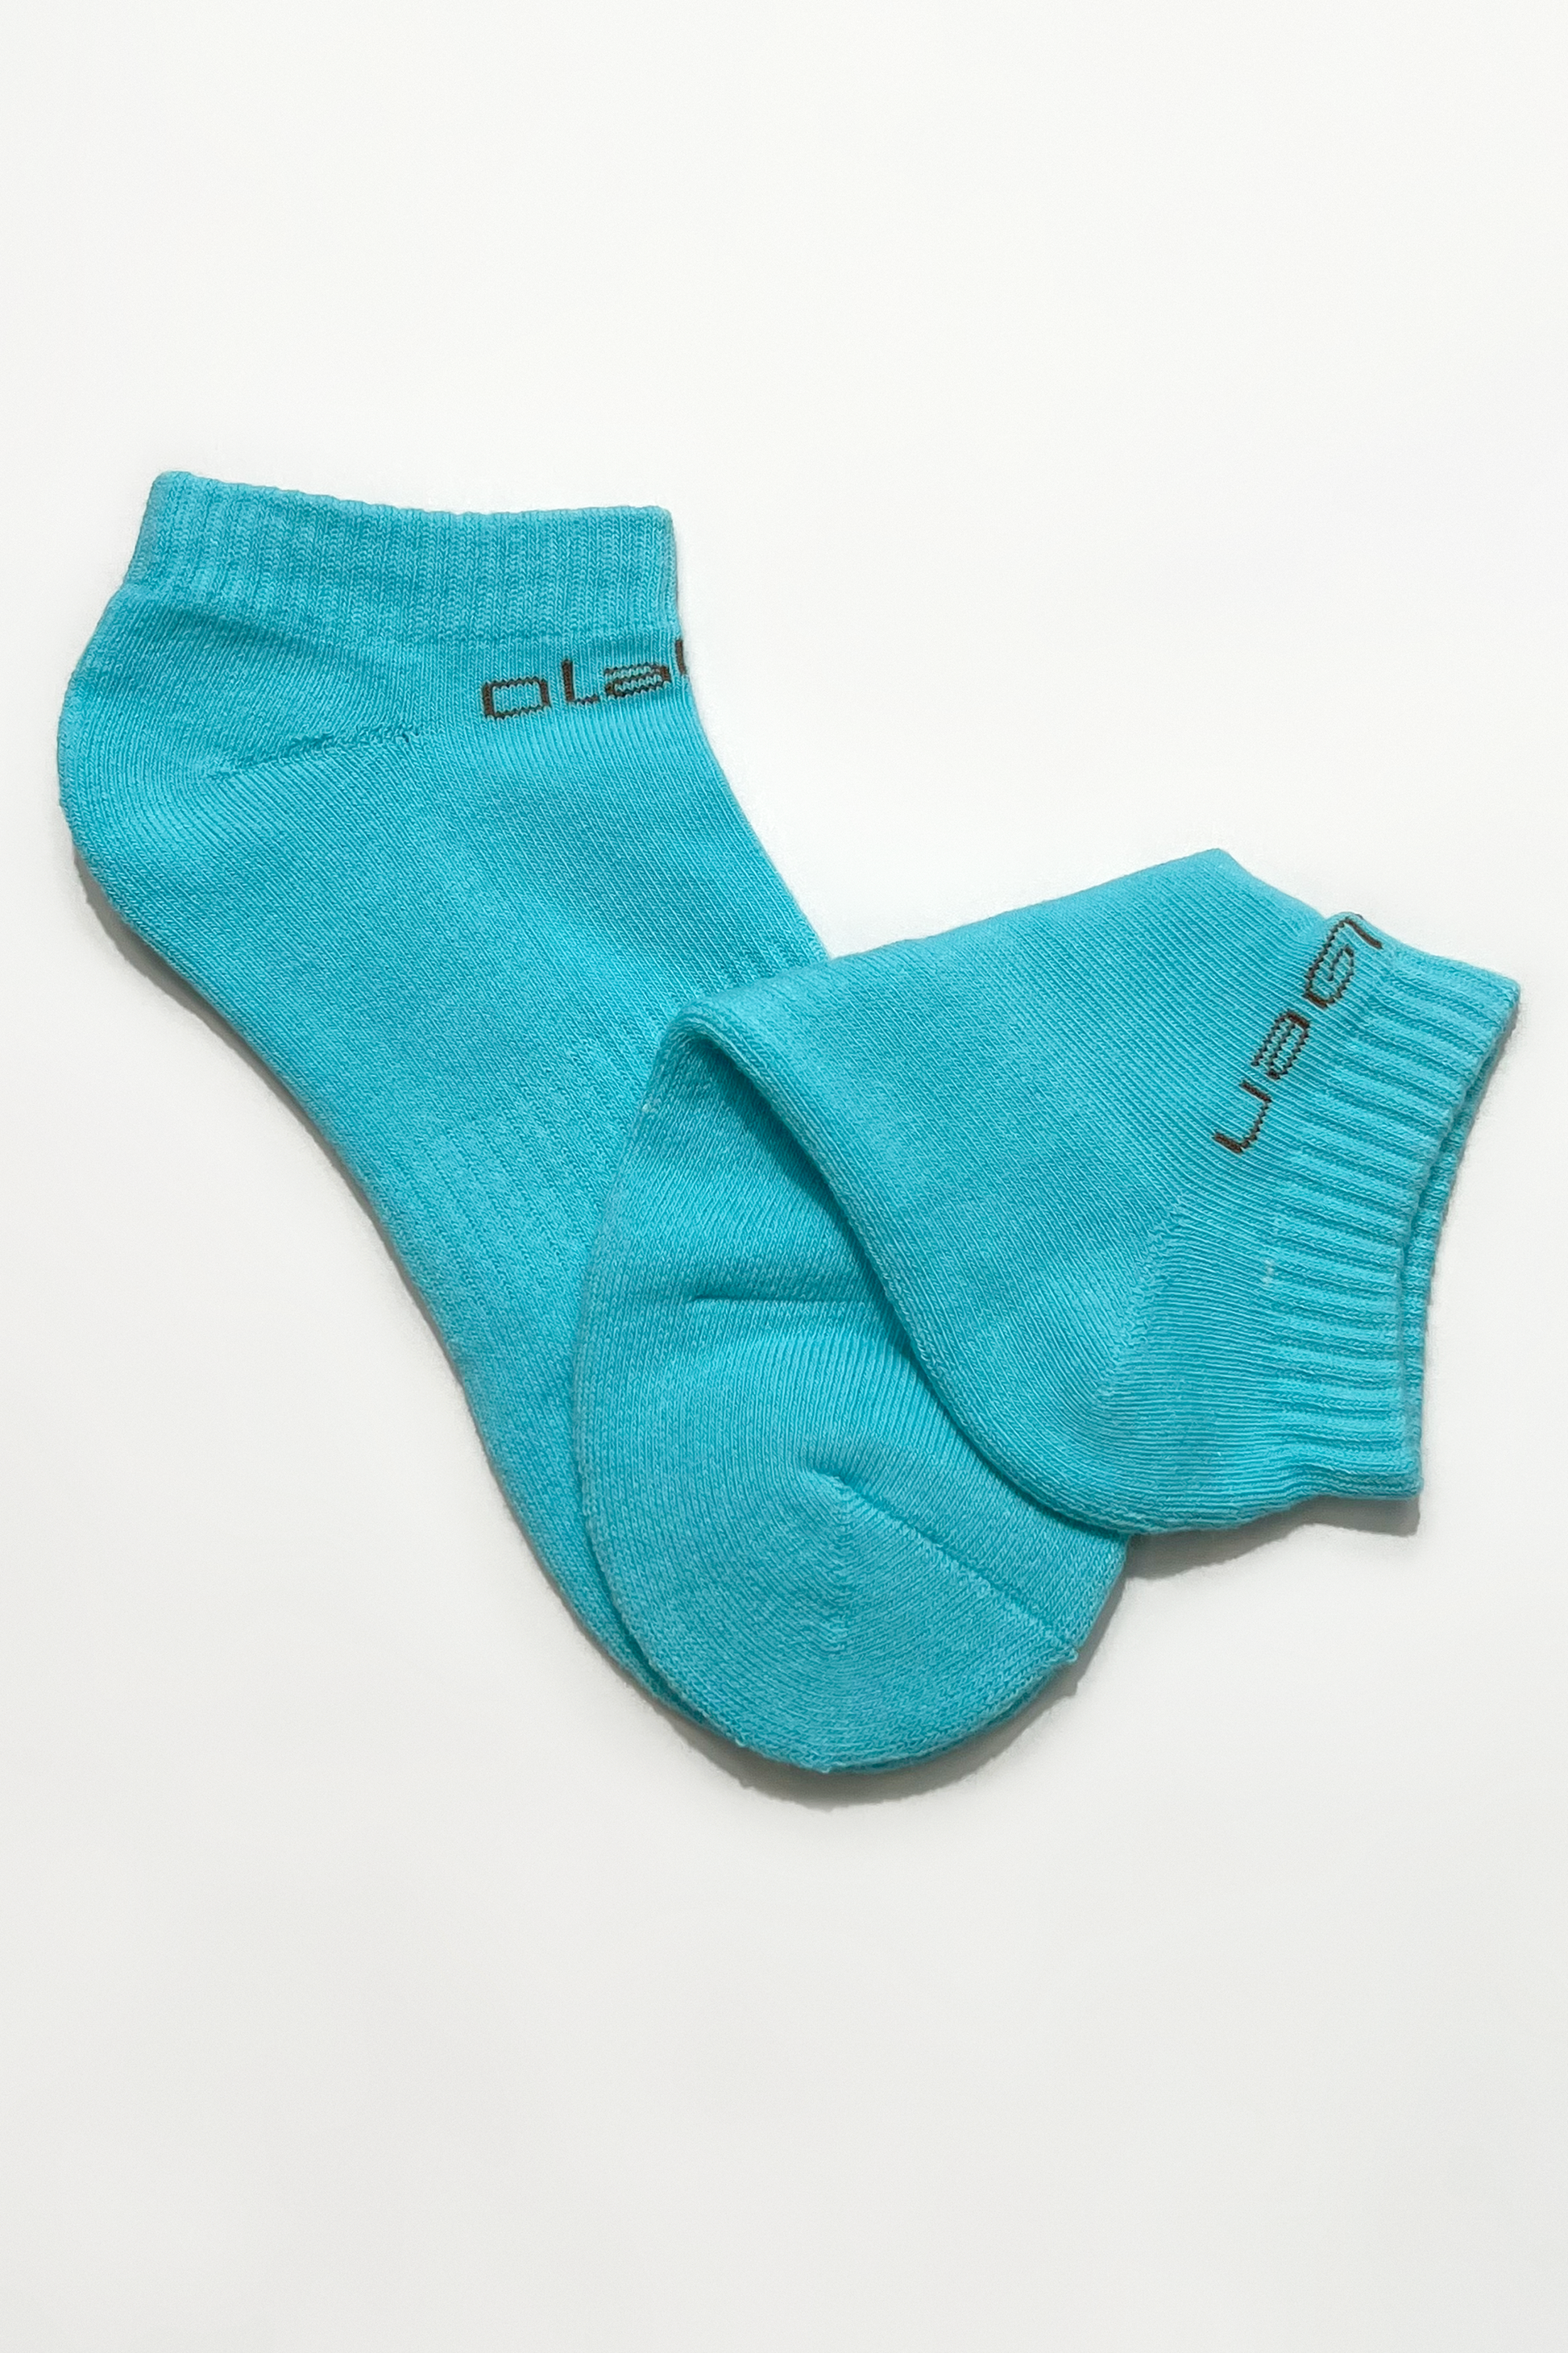 Pair of blue short socks with a kissy pattern, perfect for a casual look.